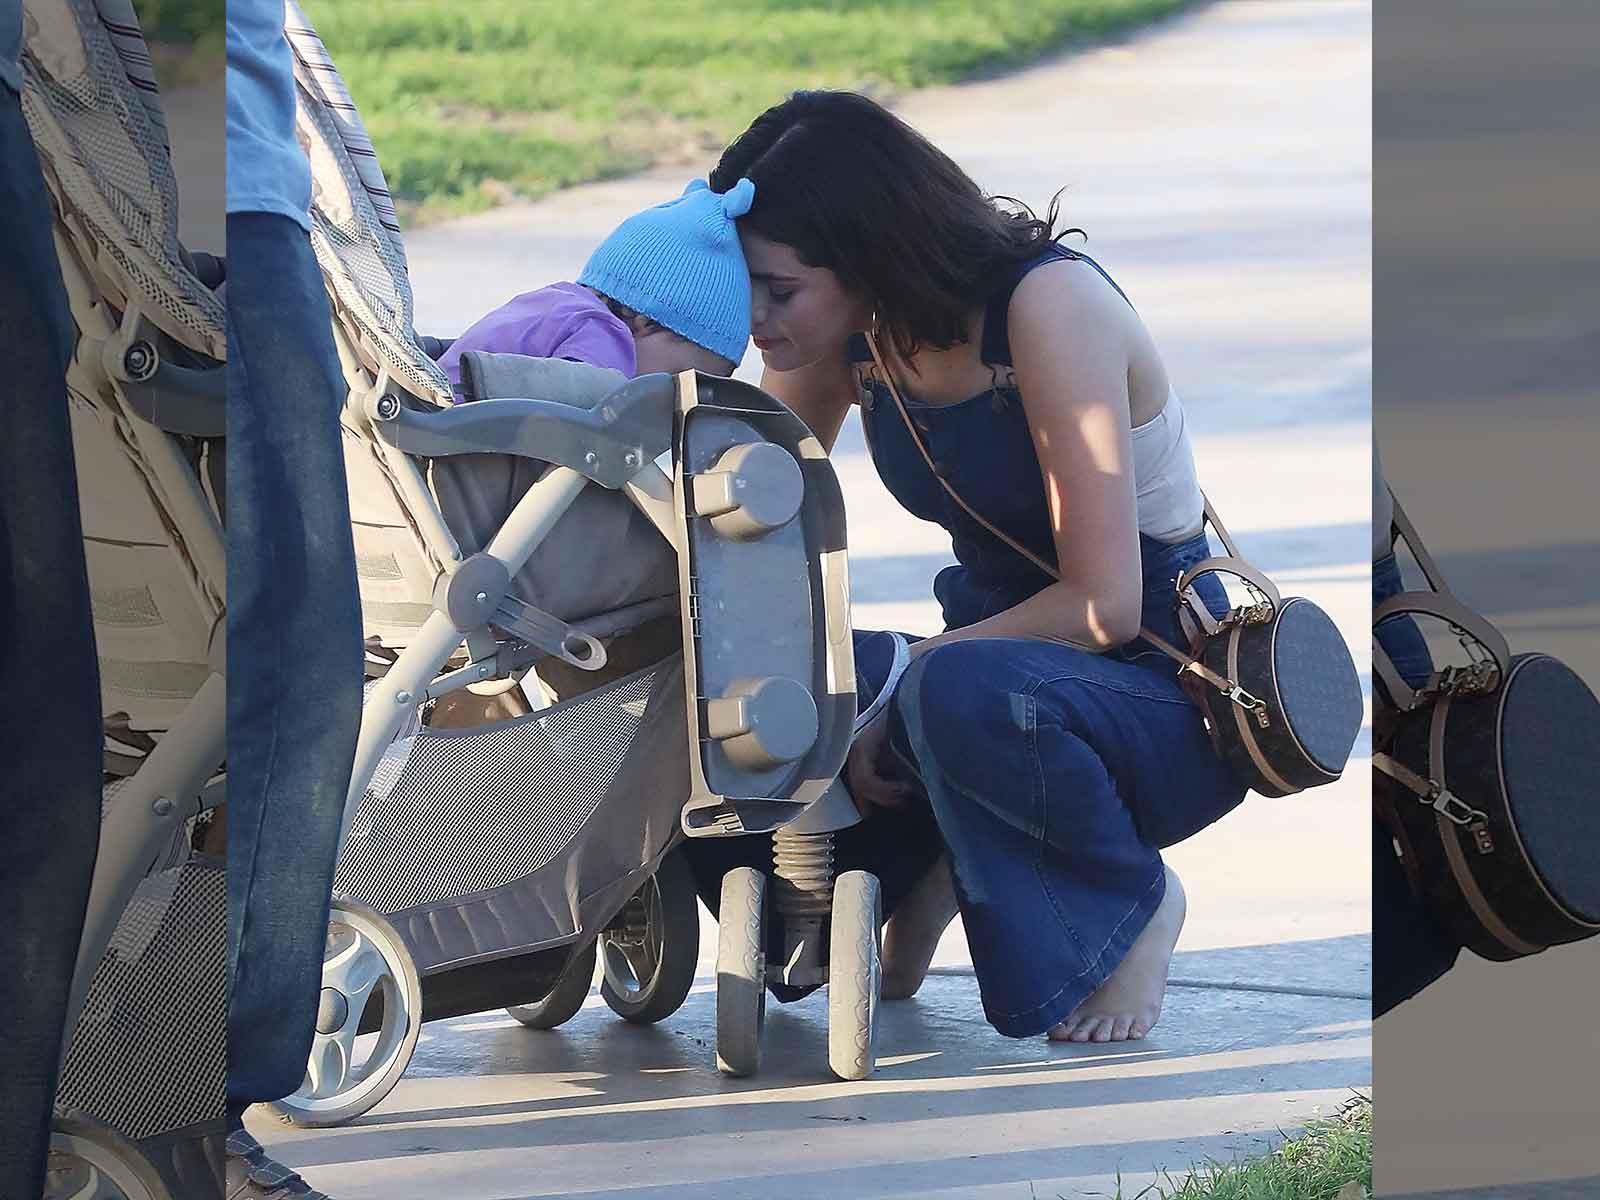 Selena Gomez Wearing Overalls While Nuzzling a Baby Is Cuteness Overload